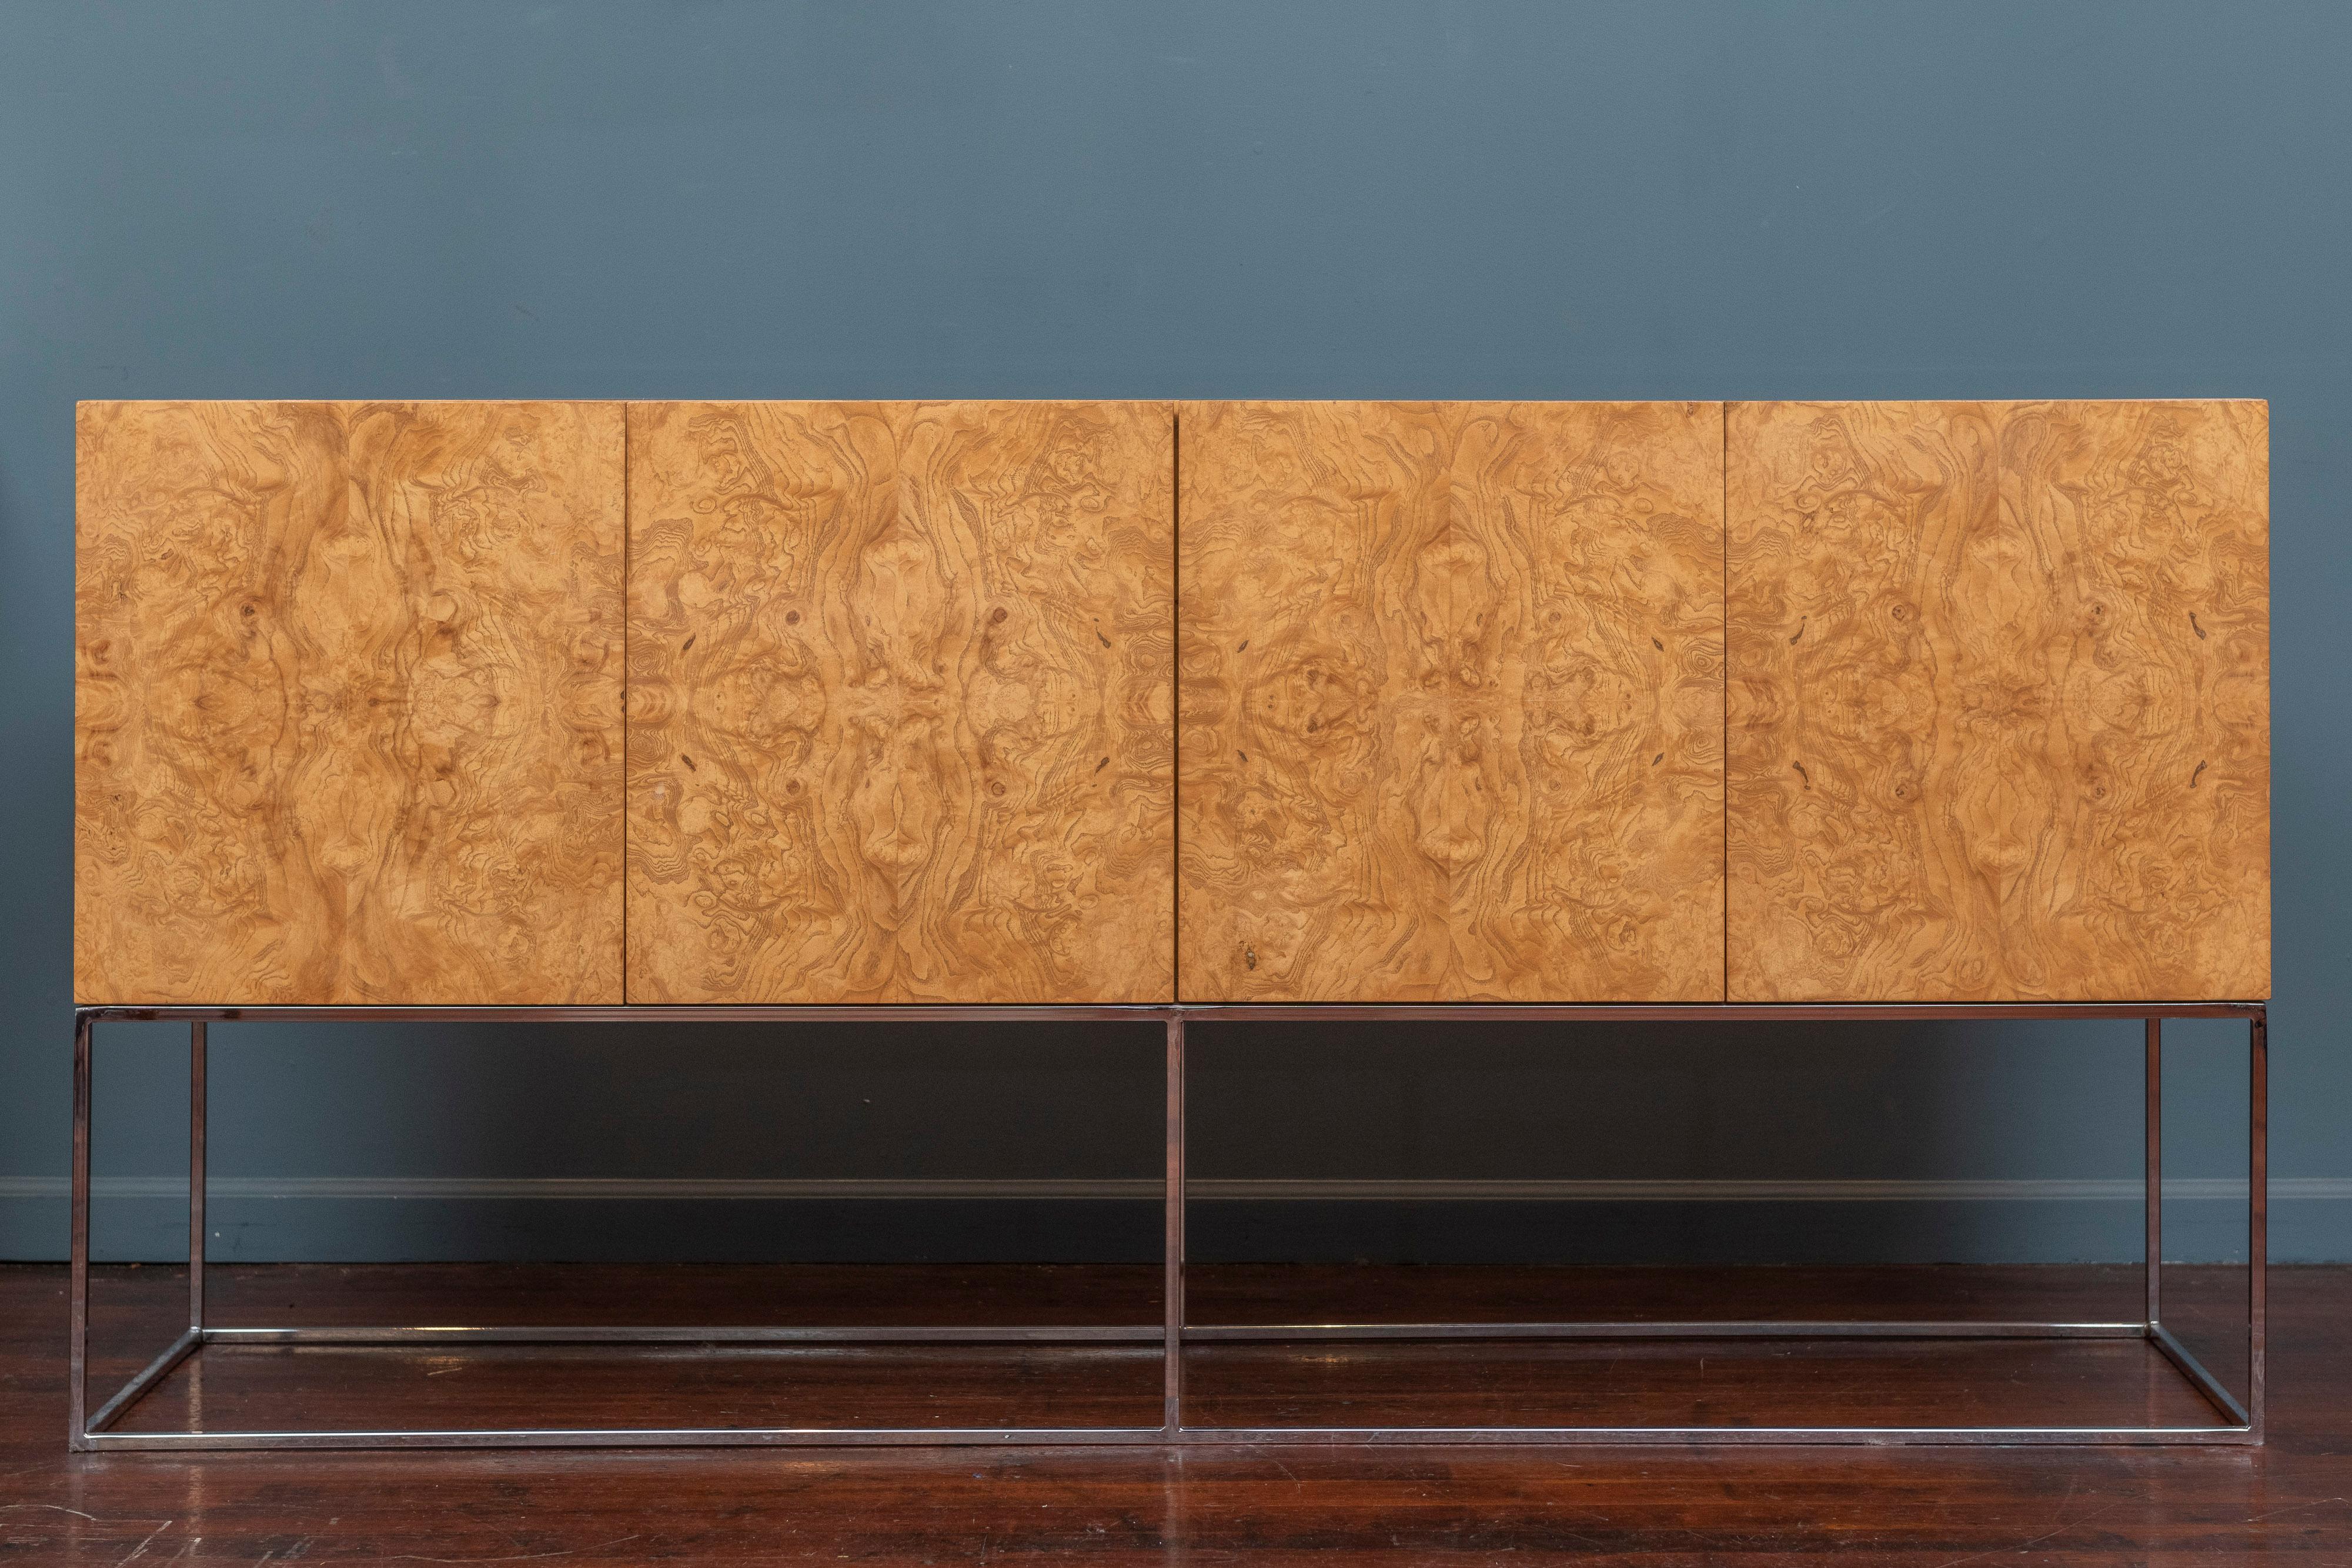 Milo Baughman design burl olive wood credenza or cabinet for Thayer Coggin, U.S.A. Beautiful burl wood figuring throughout the exterior and interior of the cabinet with an adjustable glass shelf and two drawers for accessories, labeled.